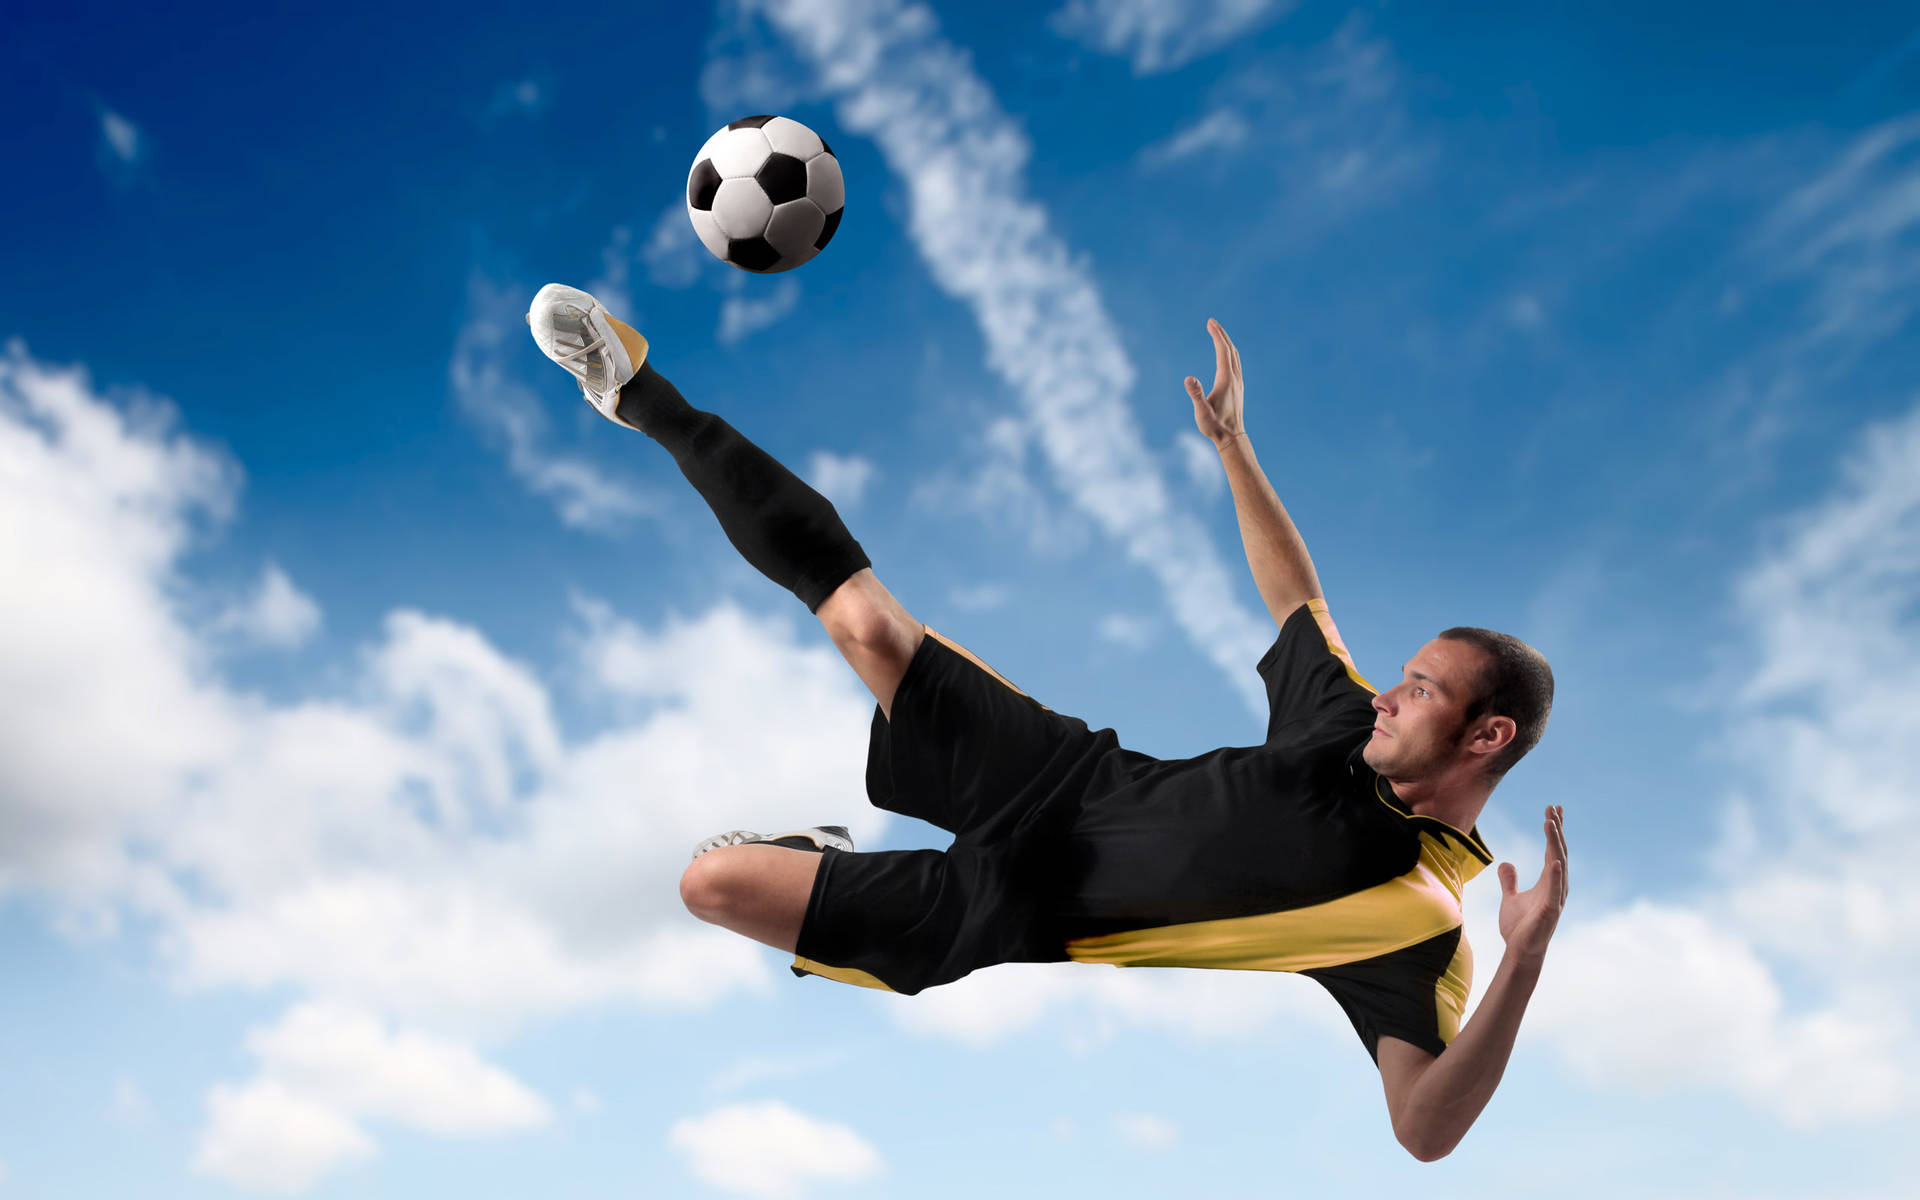 Cool Soccer Air Kick Background